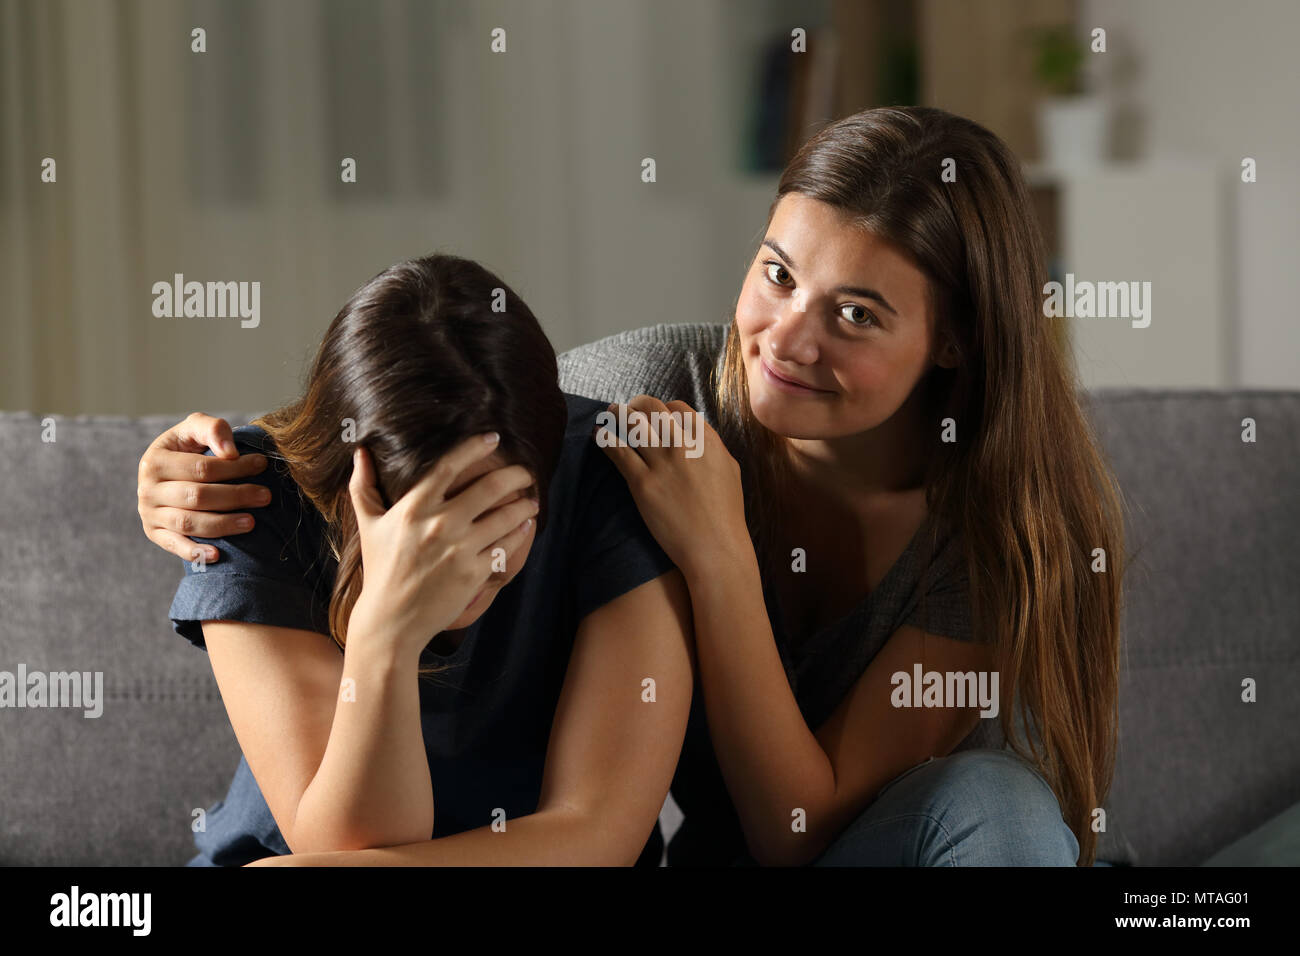 Bad teen is happy with her sad friend crying sitting on a couch in the living room at home Stock Photo